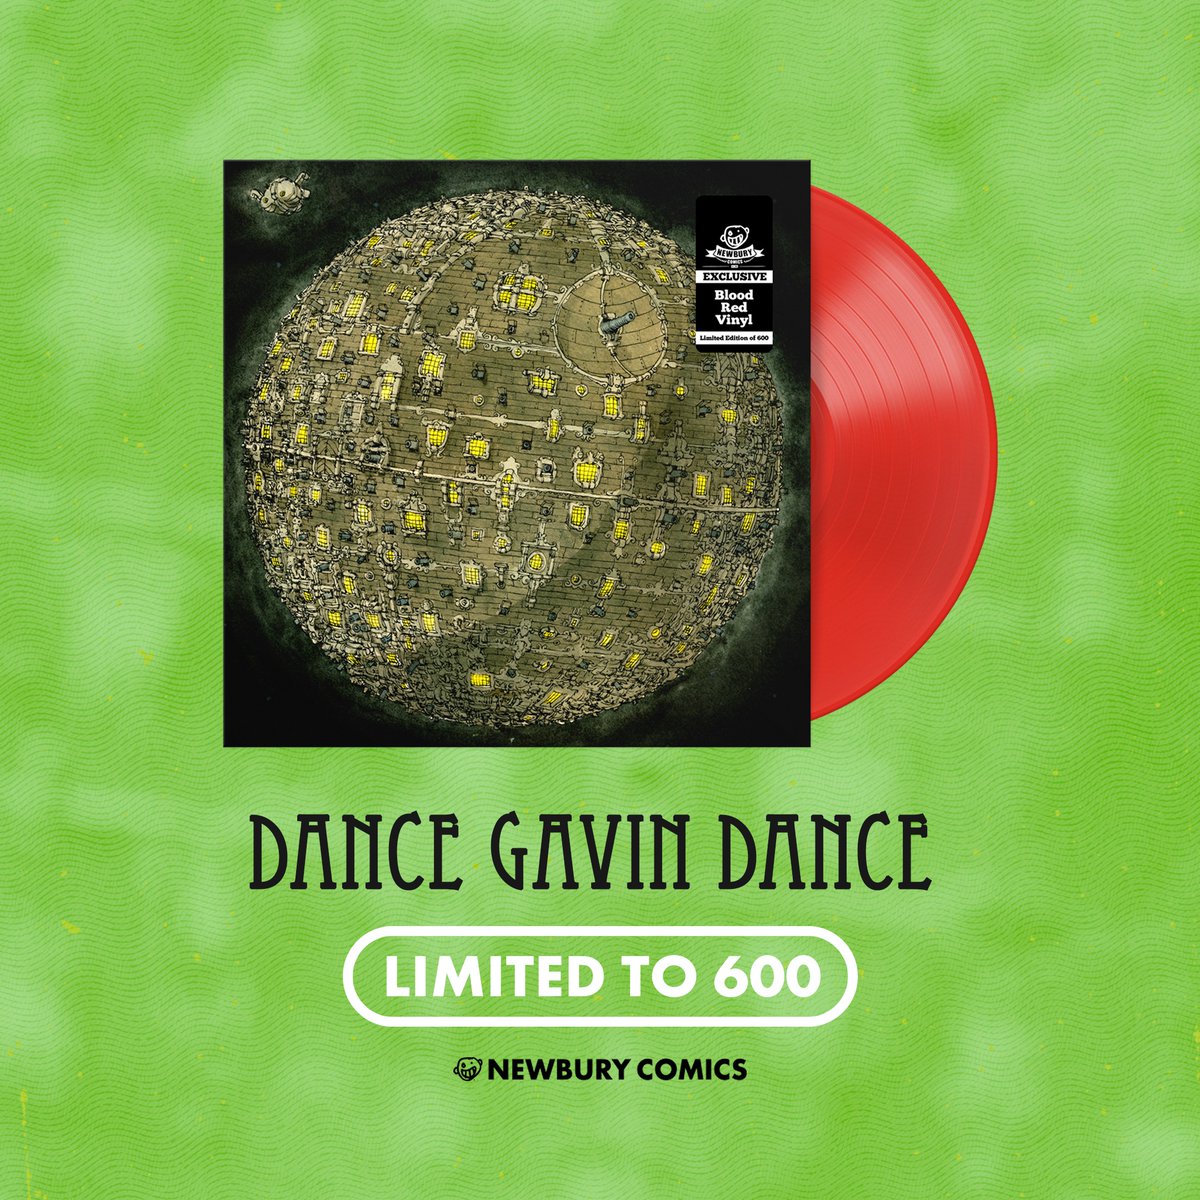 LIMITED @DGDtheband self-titled exclusive Blood Red LPs are available now at @newburycomics newburycomics.com/products/dance…